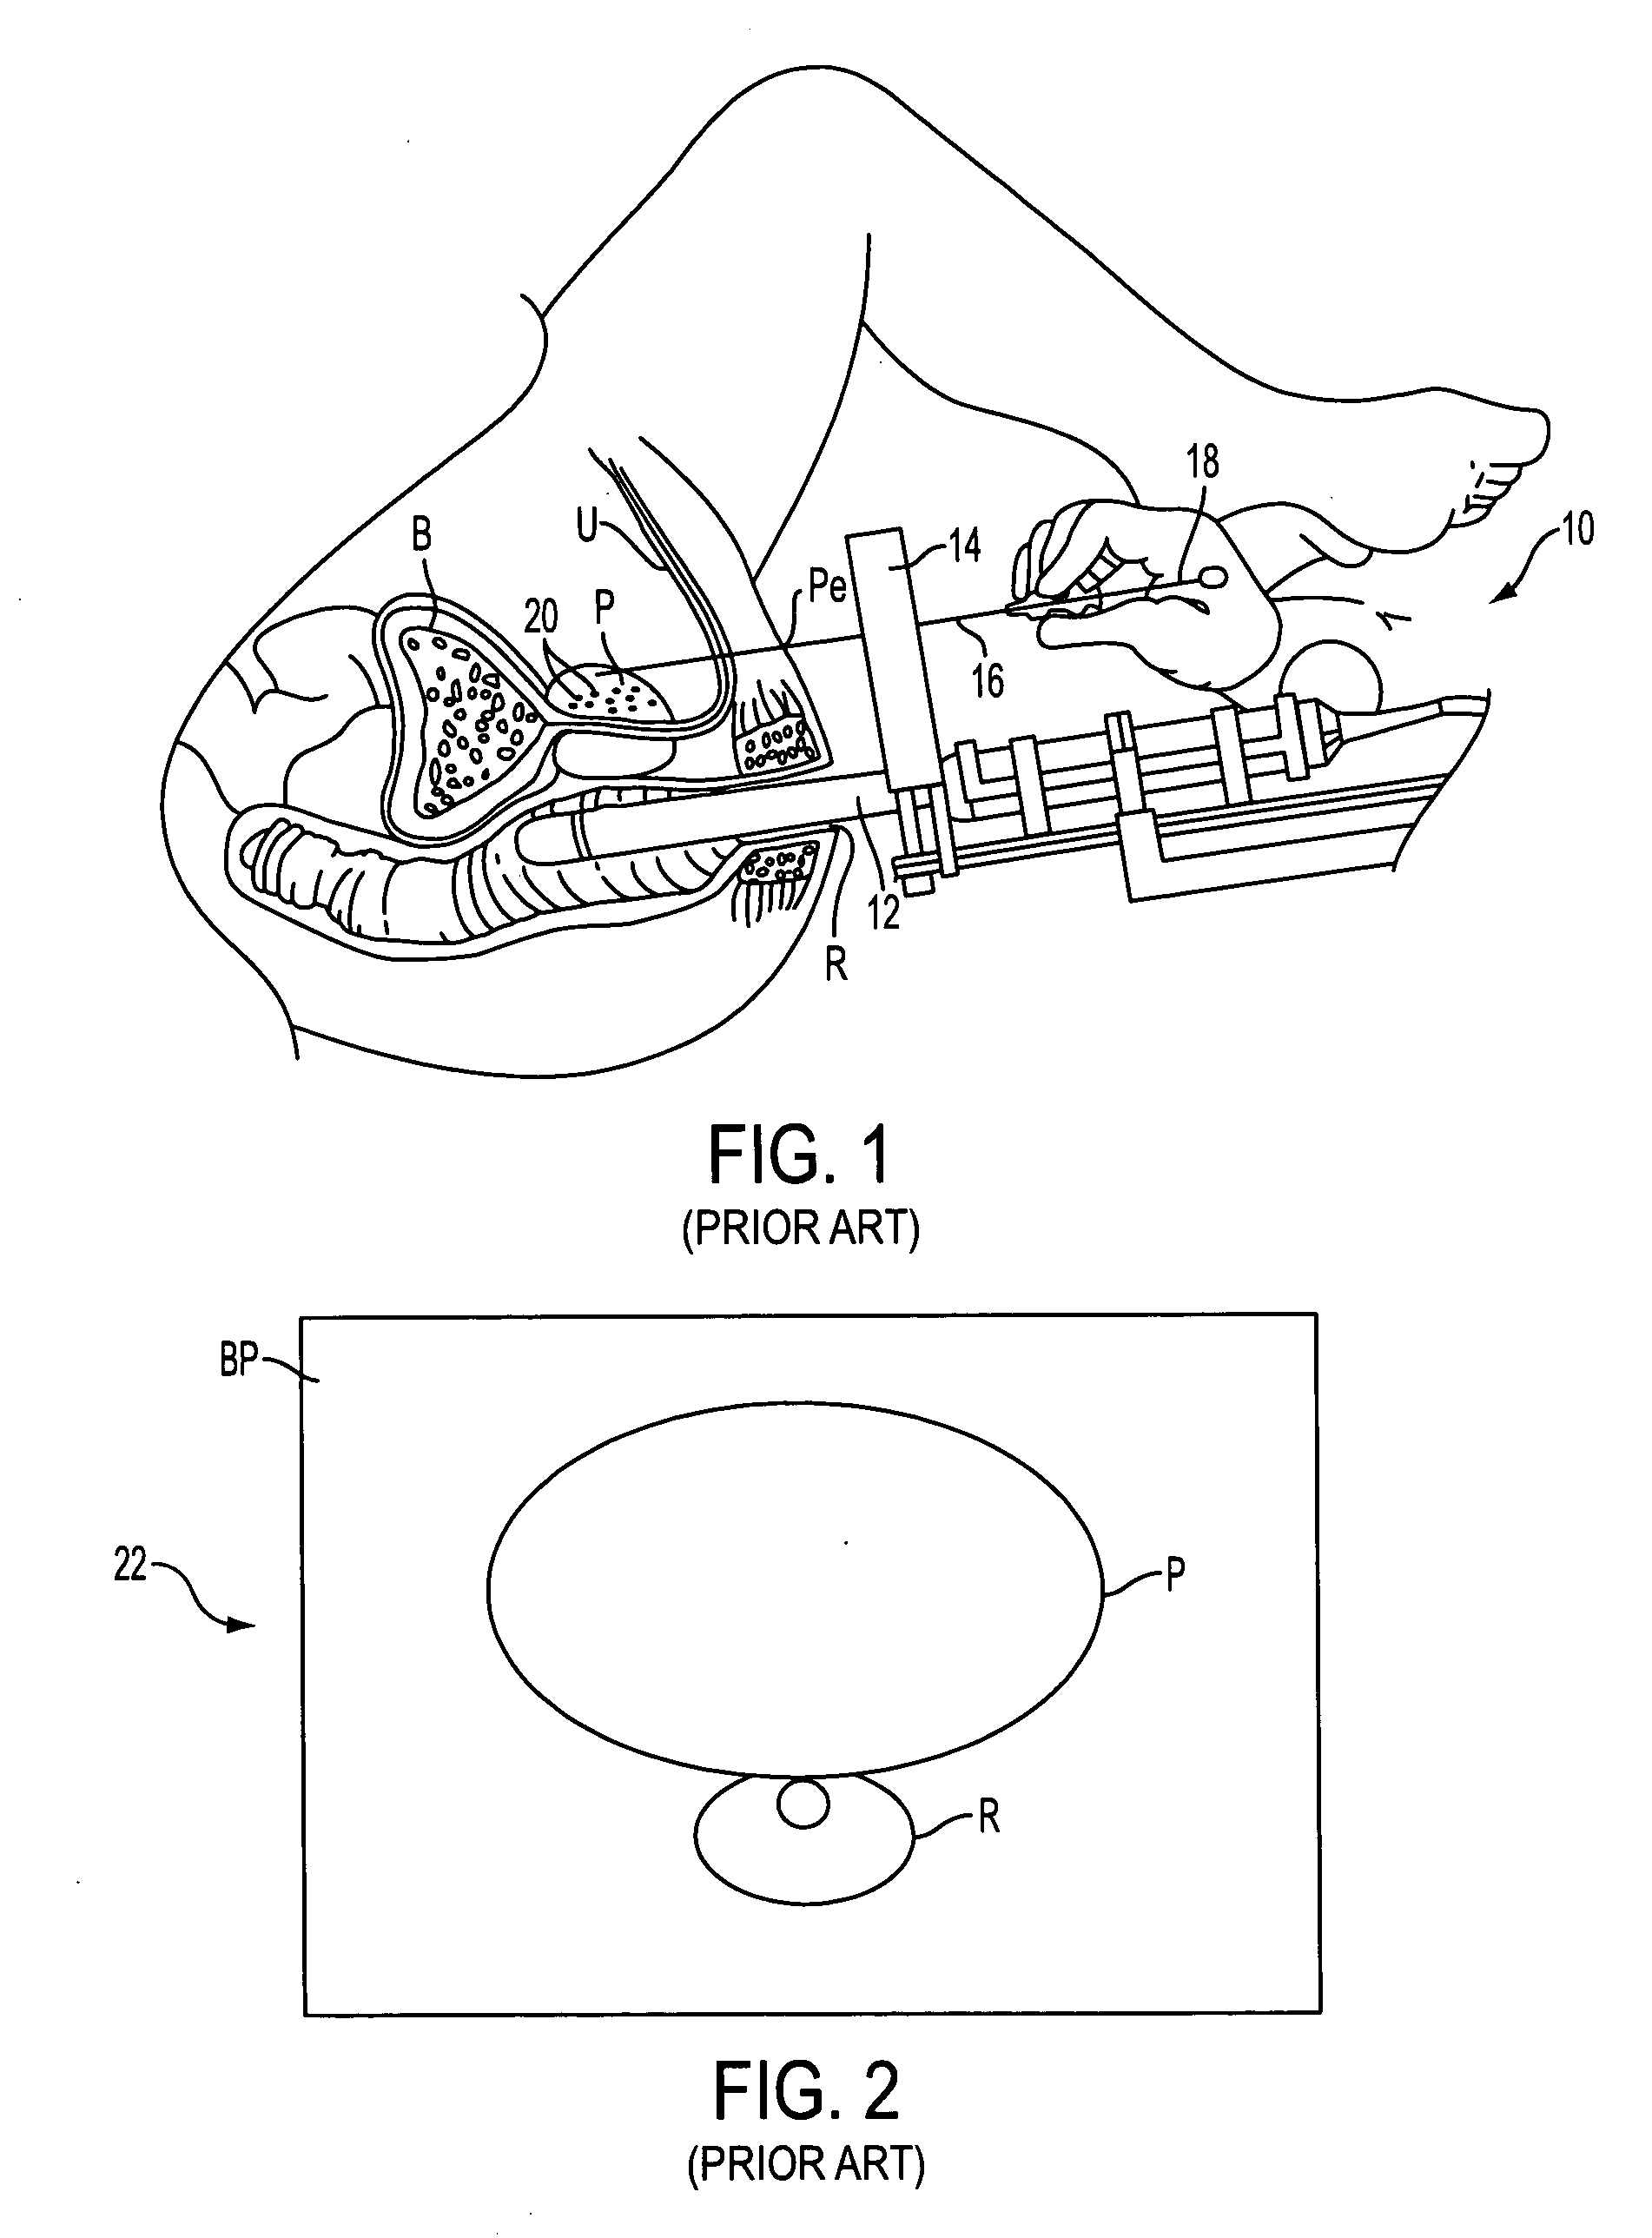 Prostate visualization device and methods of use